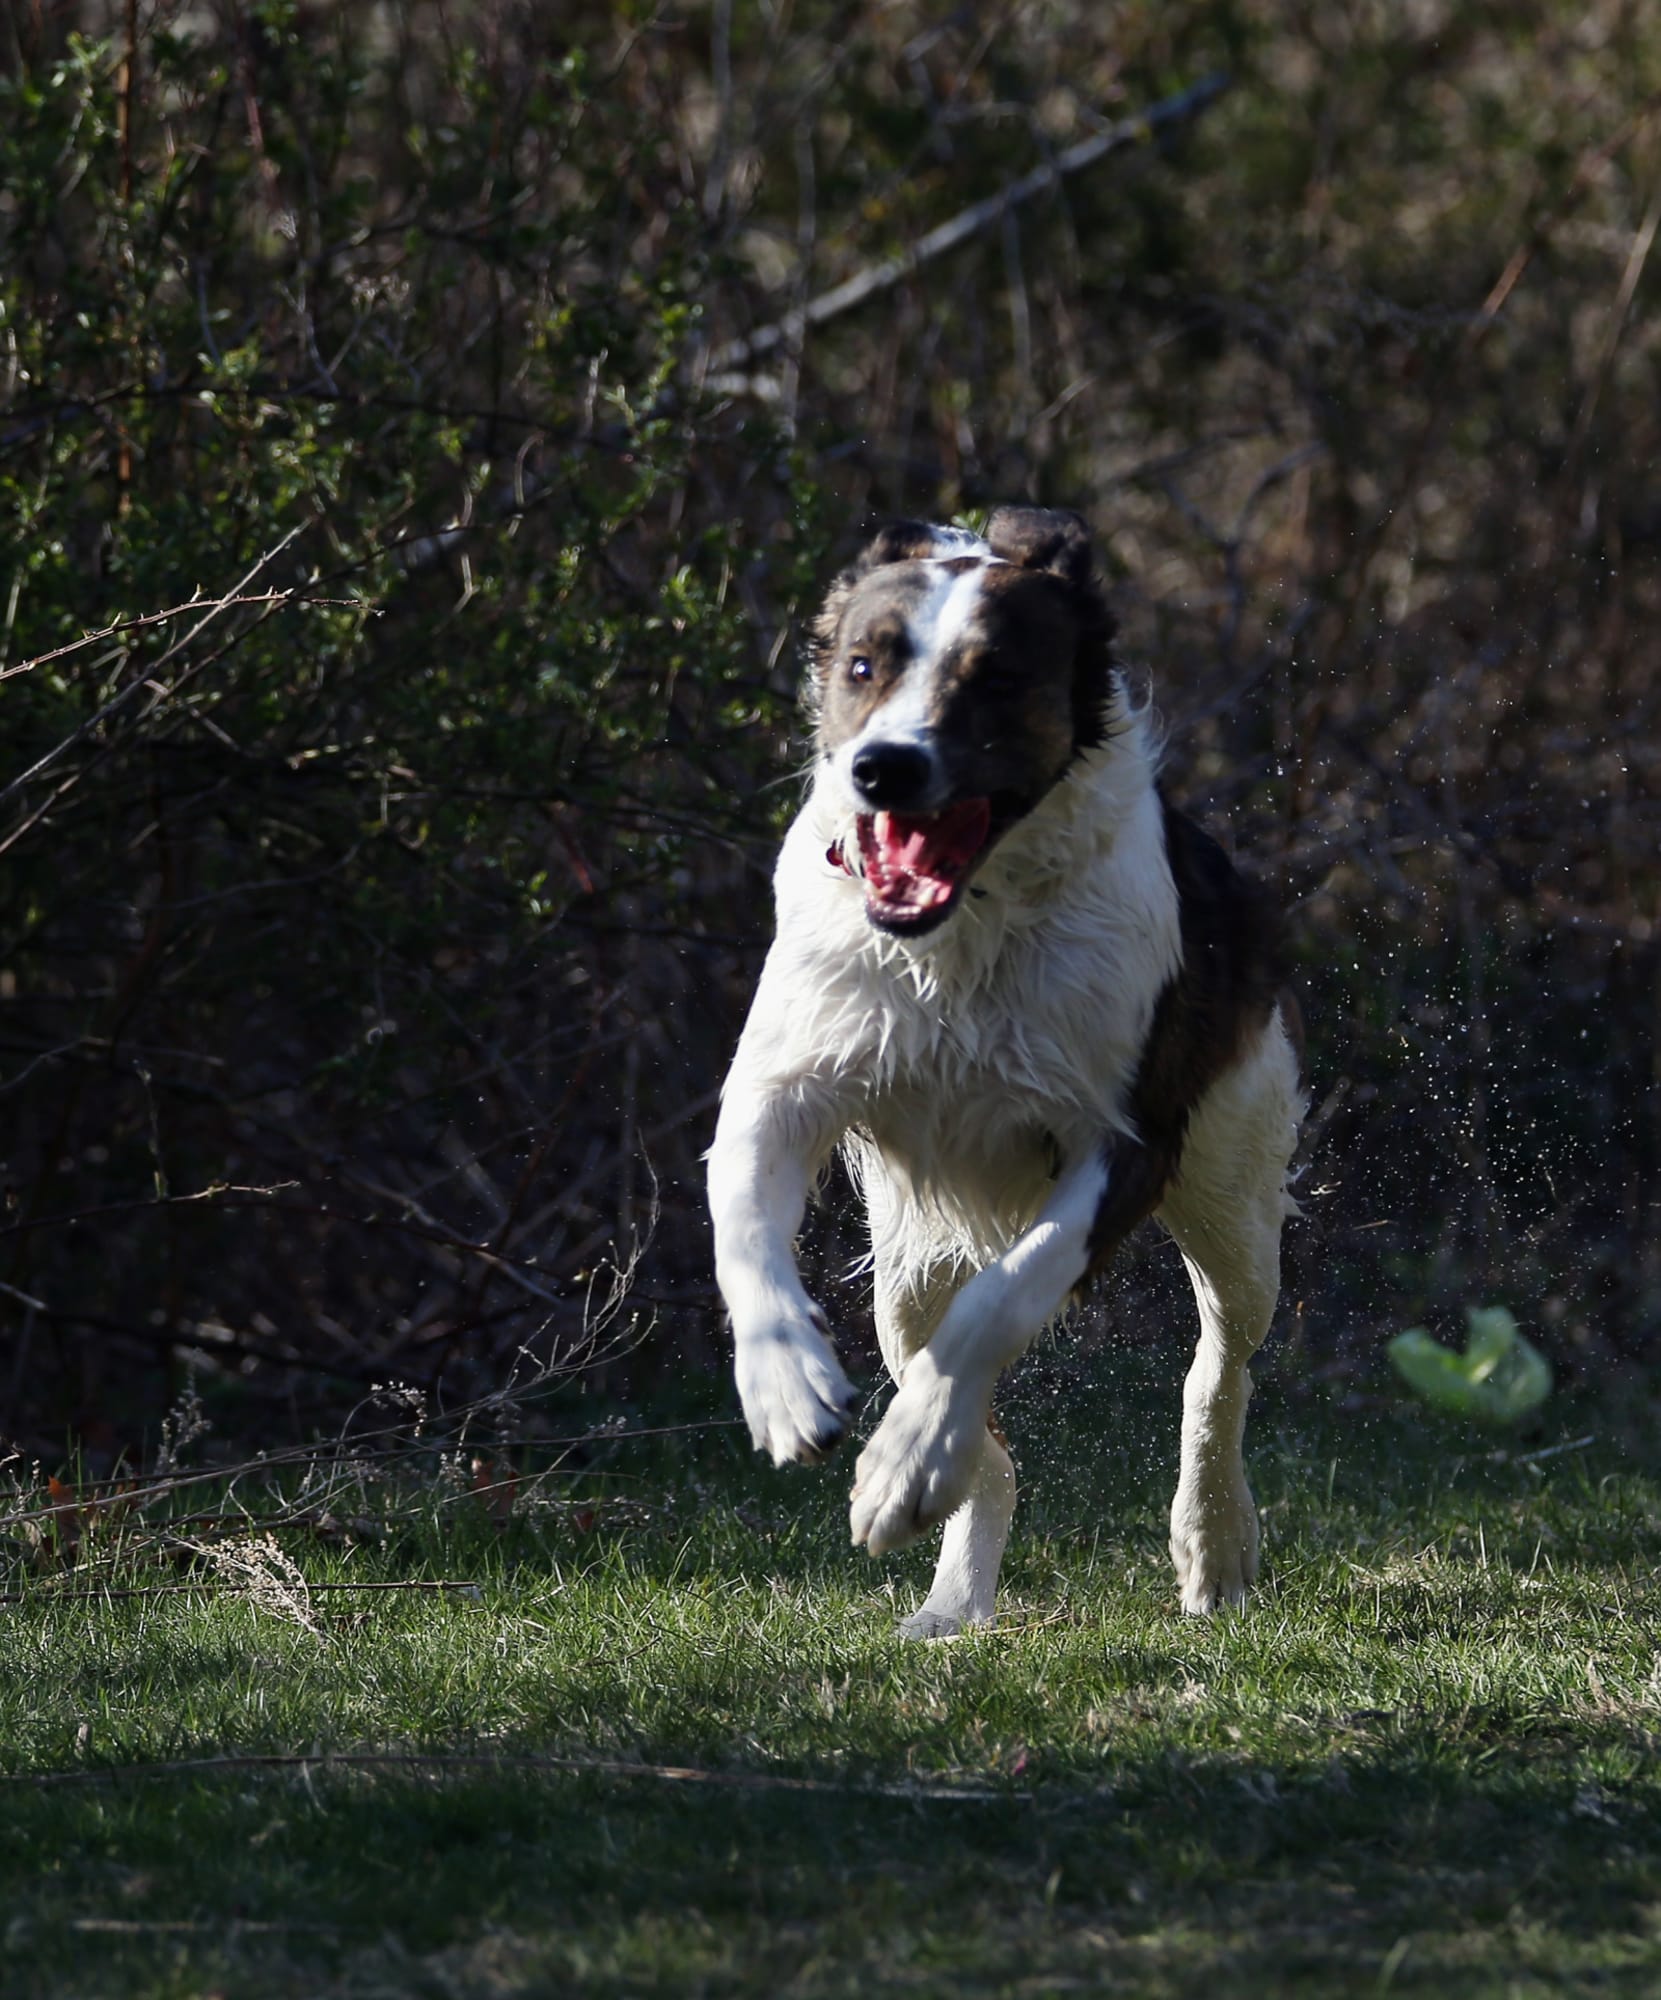 Border Collie Trained to Recognize 1,022 Nouns Dies - The New York Times